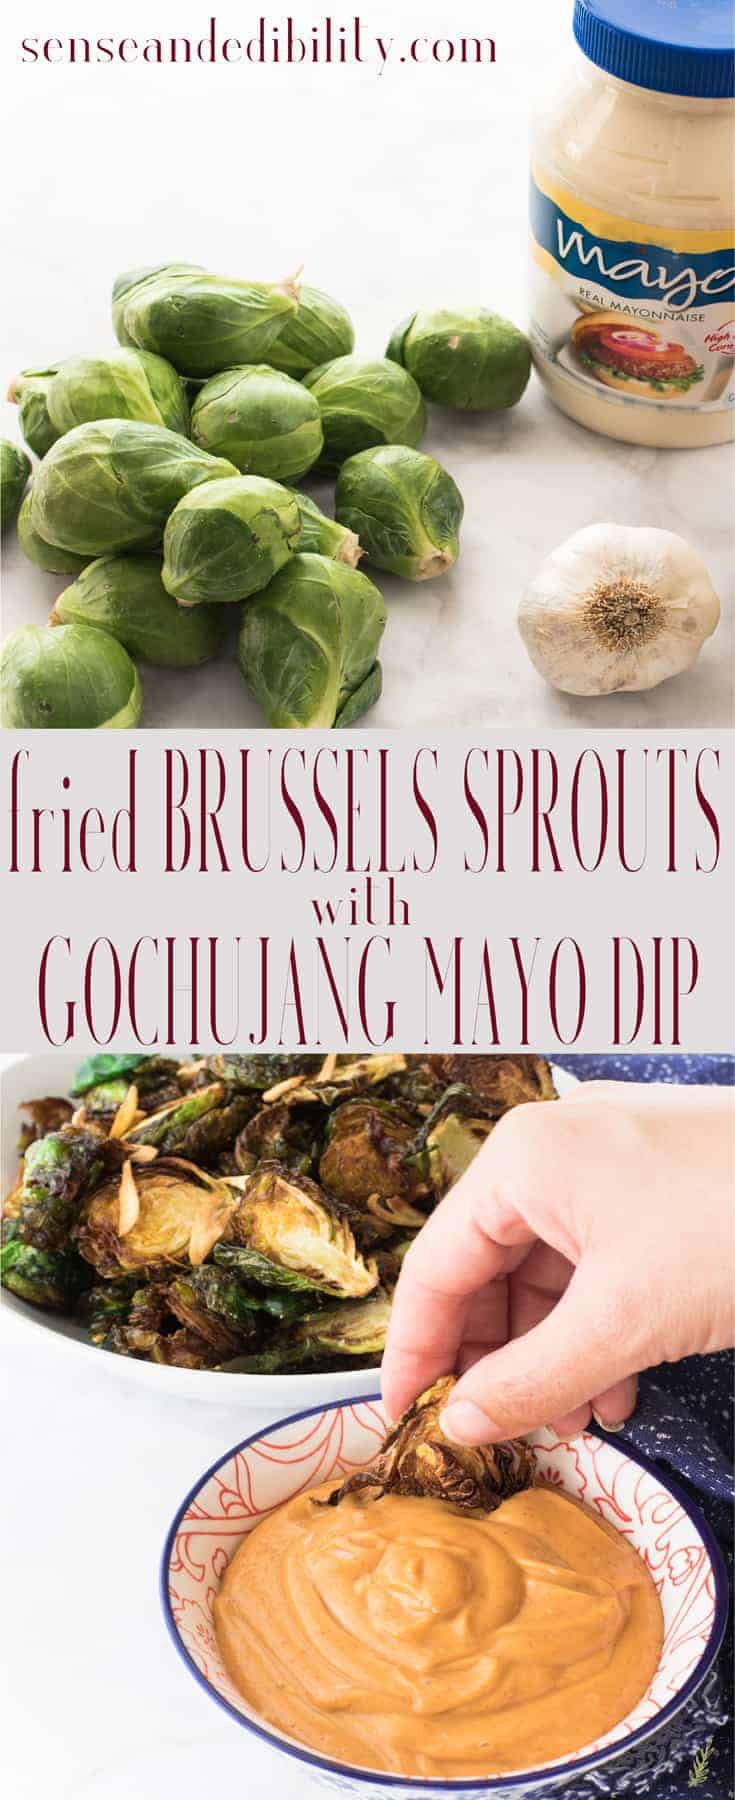 Sense & Edibility's Fried Brussels Sprouts with Gochujang Mayo Dip Pin